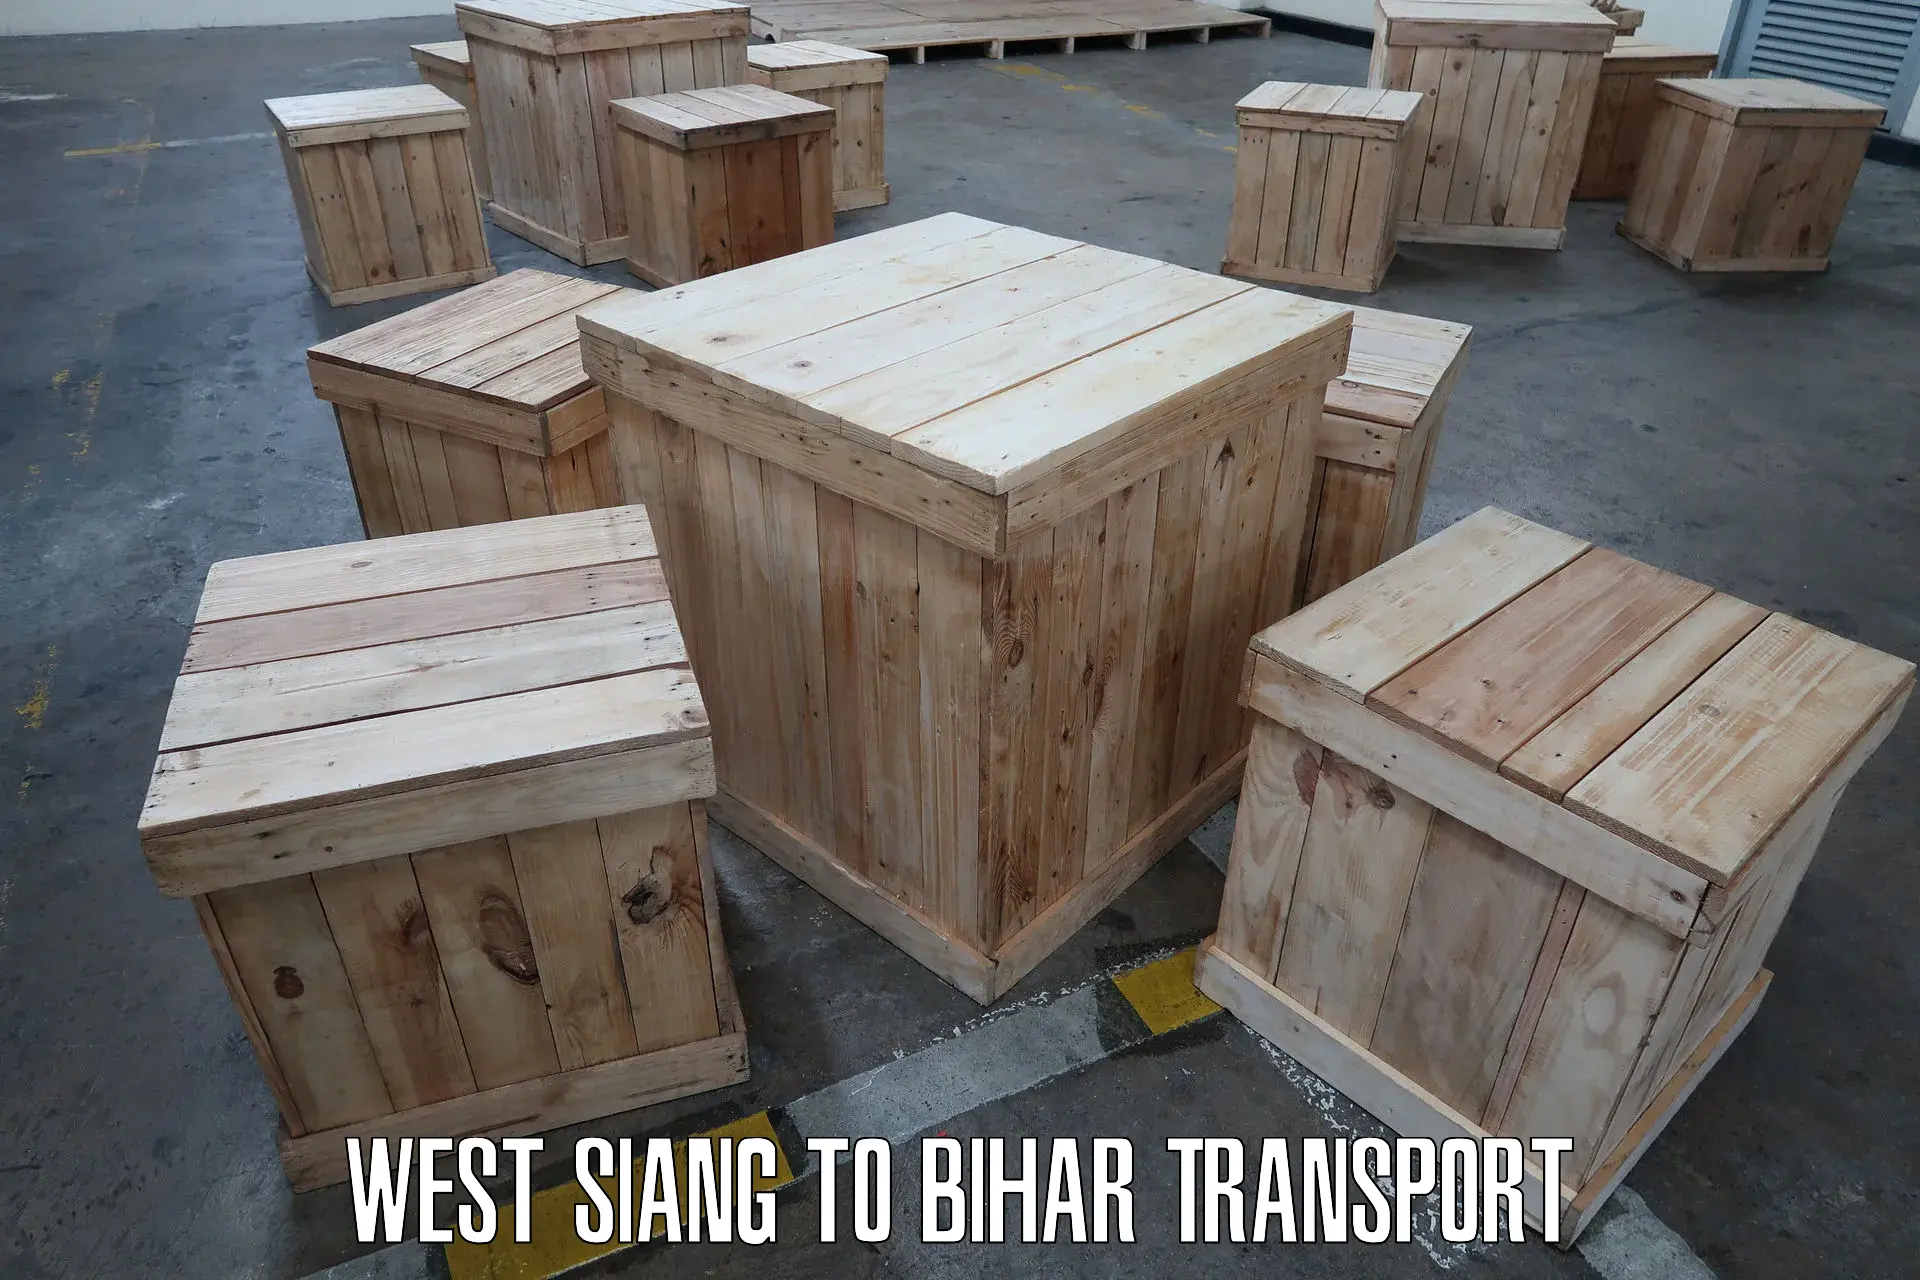 Nearby transport service West Siang to Dholi Moraul